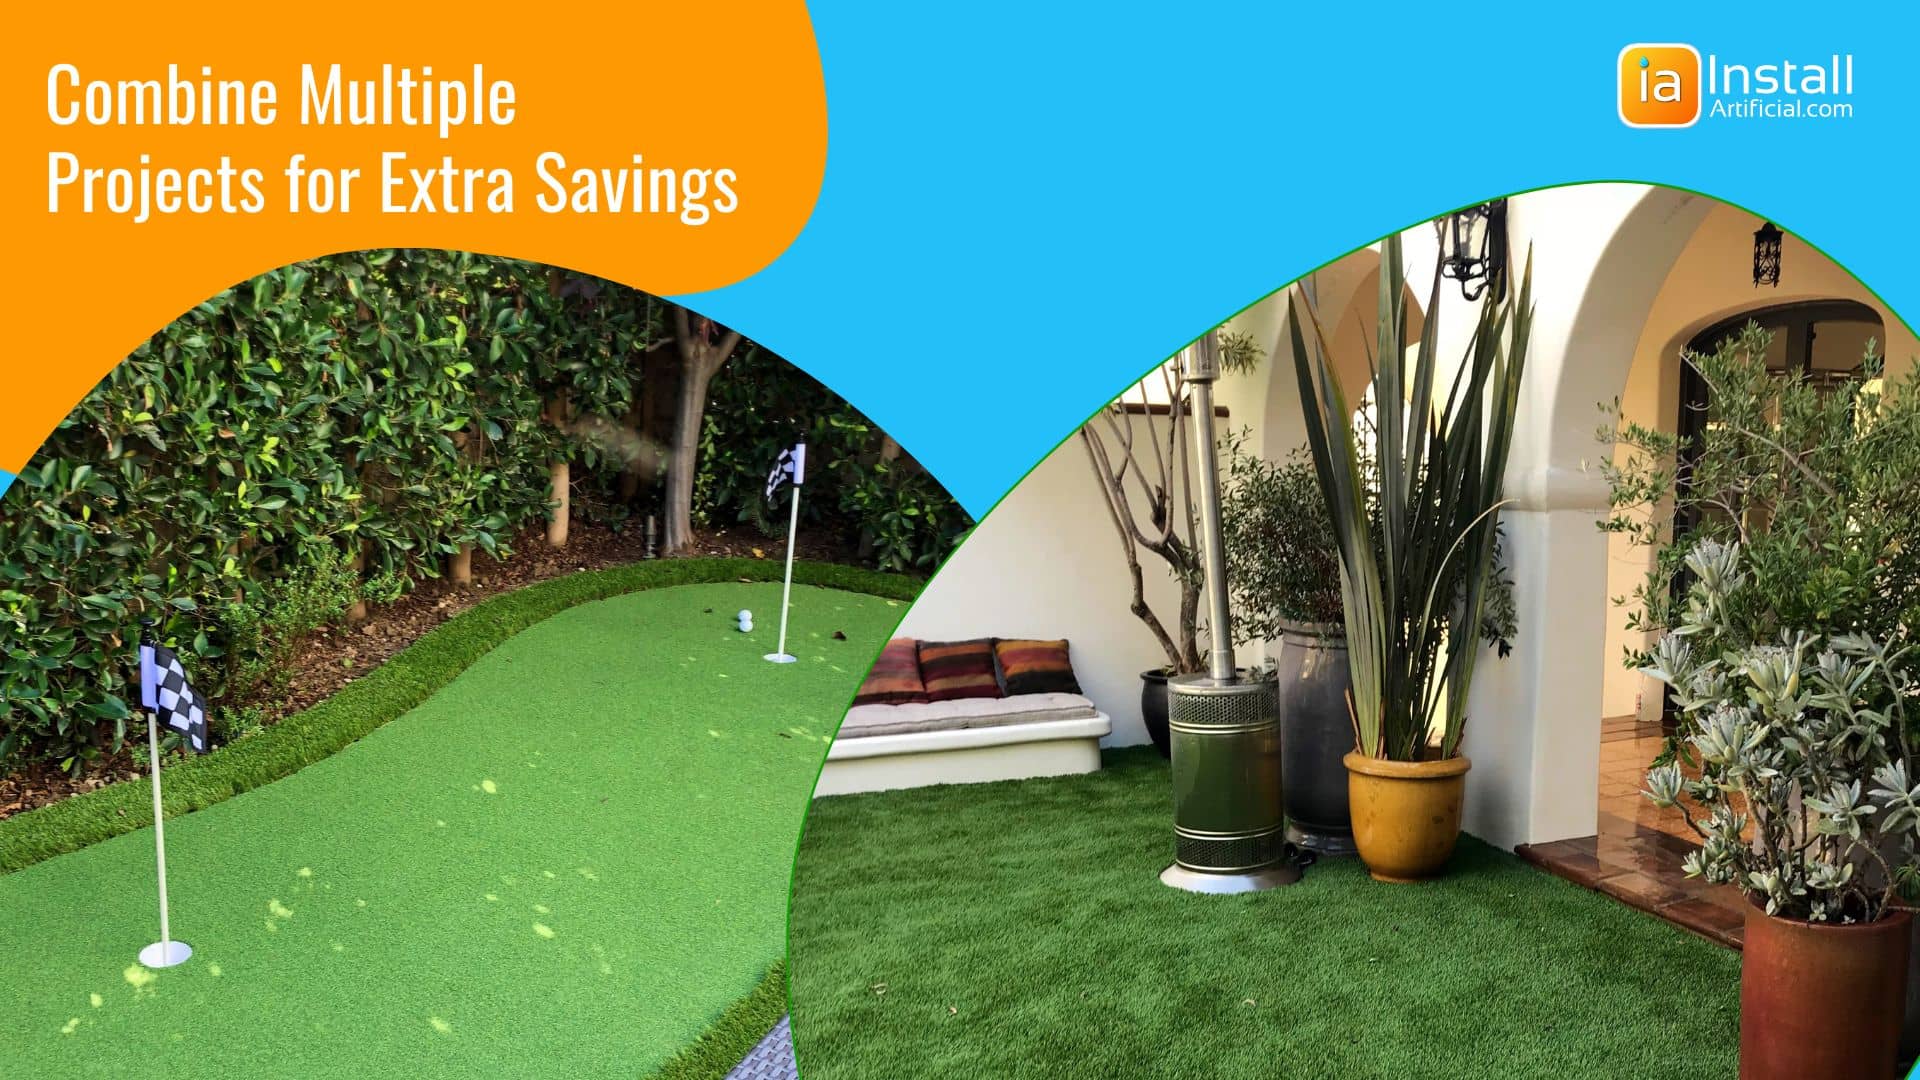 Combining two artificial grass projects for extra discounts 